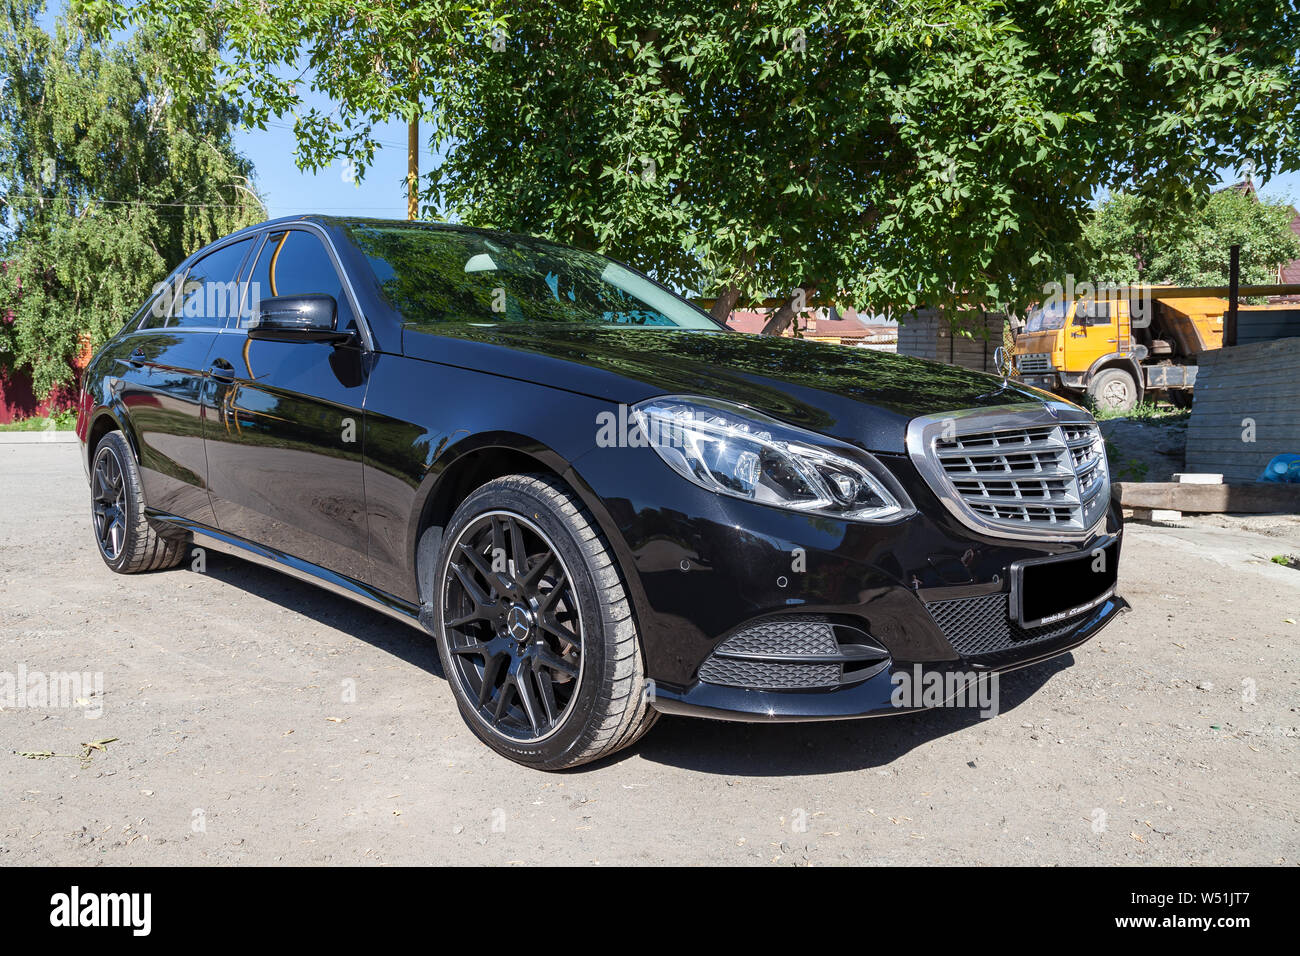 Novosibirsk Russia 07 19 Black Mercedes Benz E Class 50 13 Year Front View With Dark Gray Interior In Excellent Condition In A Parking Sp Stock Photo Alamy